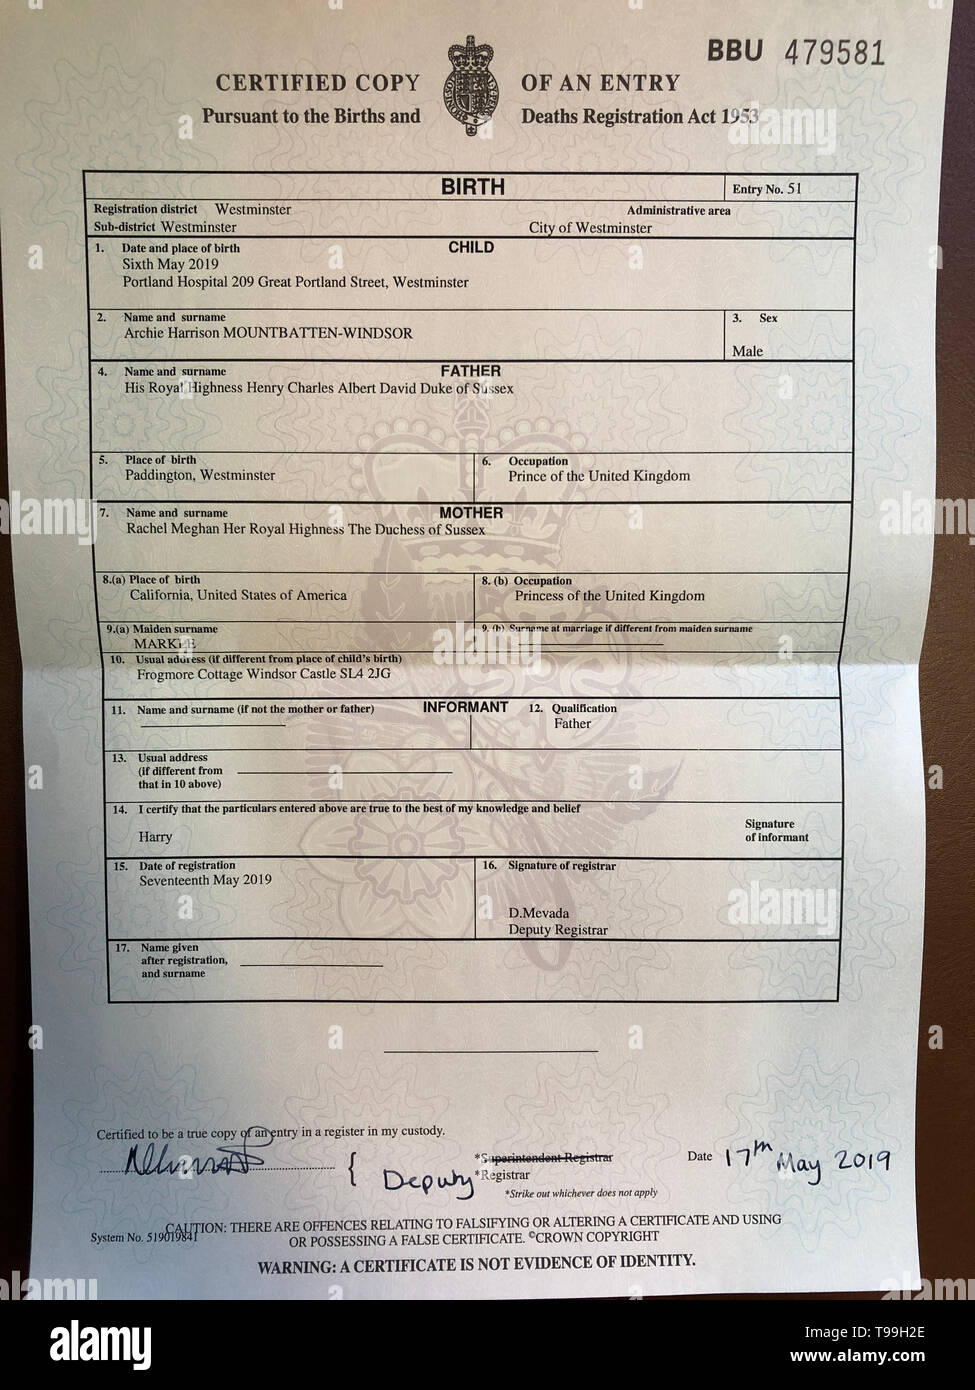 The birth certificate of Archie Harrison Mountbatten Windsor son of